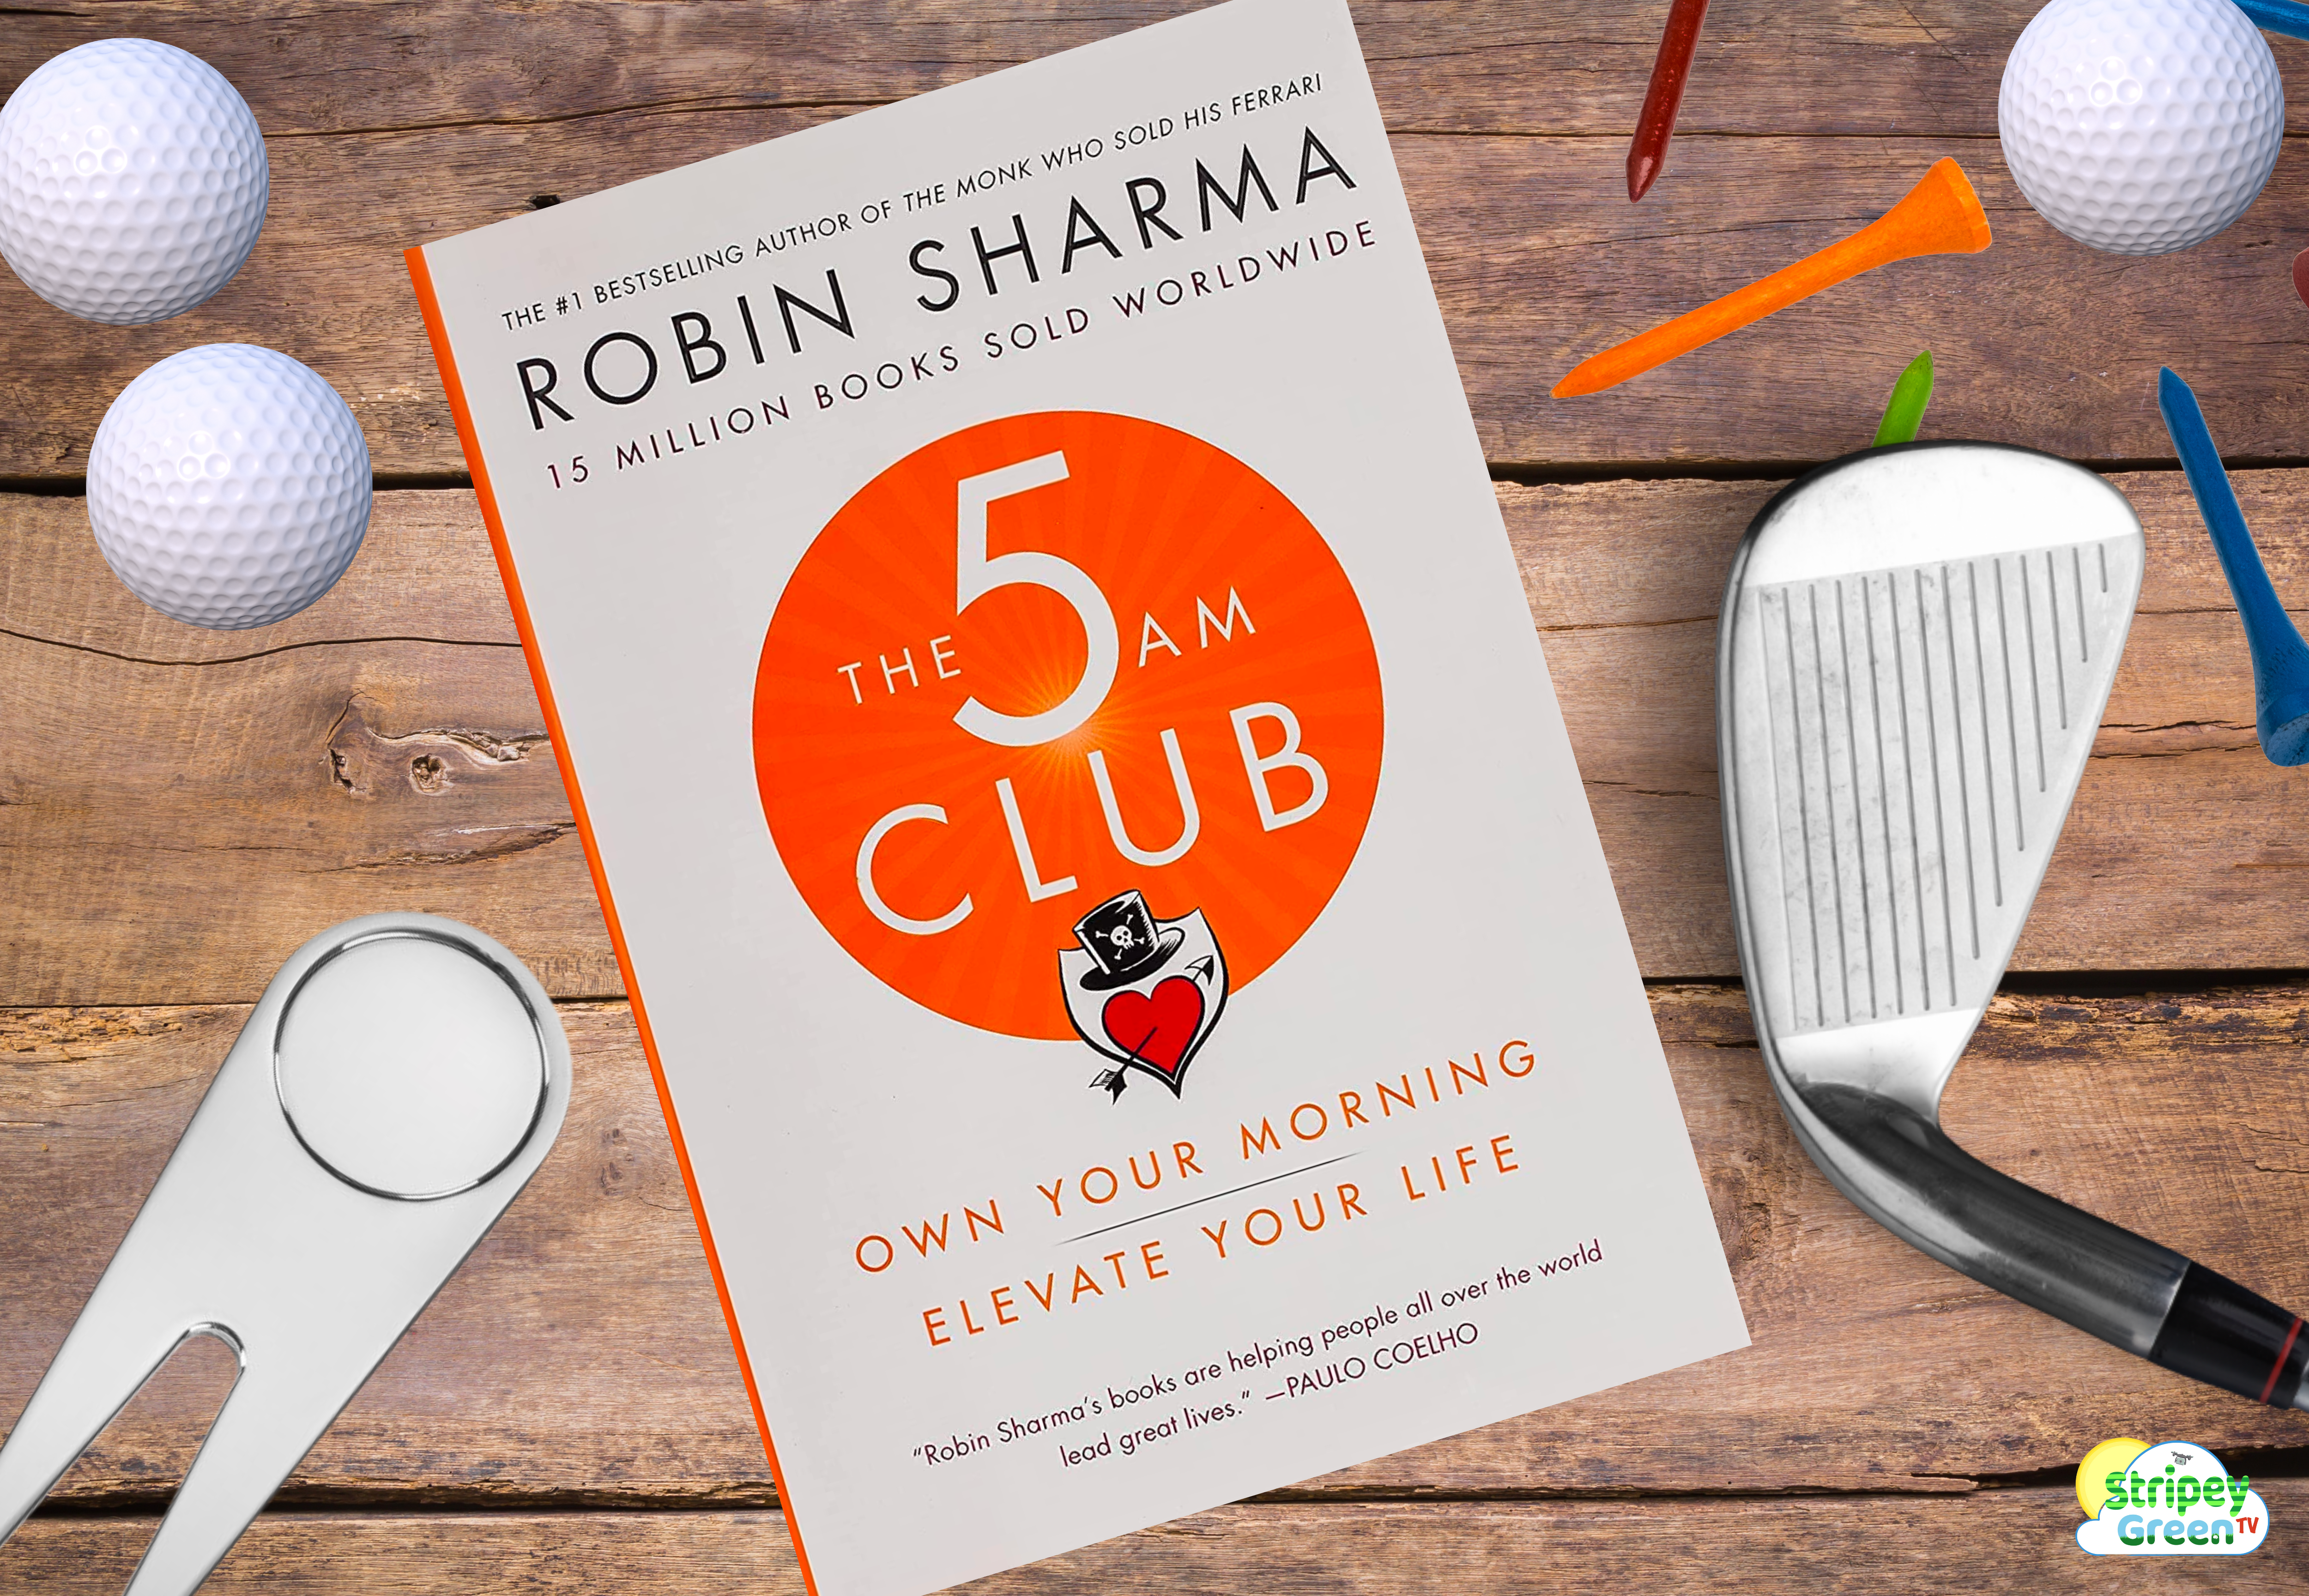 The 5am Club by Robin Sharma - Book Review.